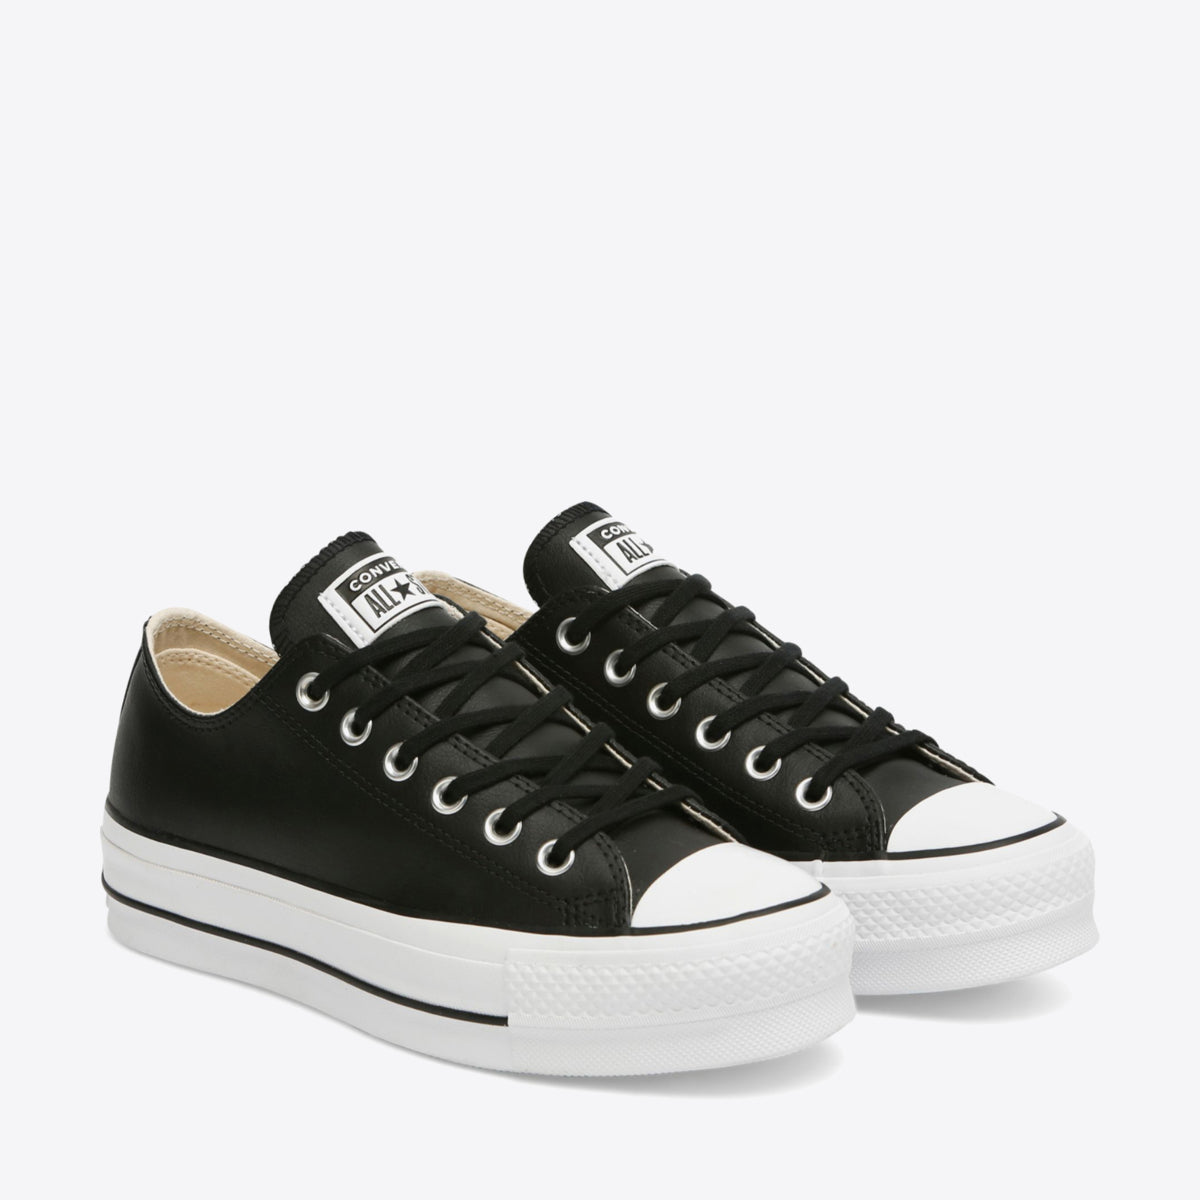 CONVERSE Chuck Taylor All Star Leather Lift Low Black/White - Image 3